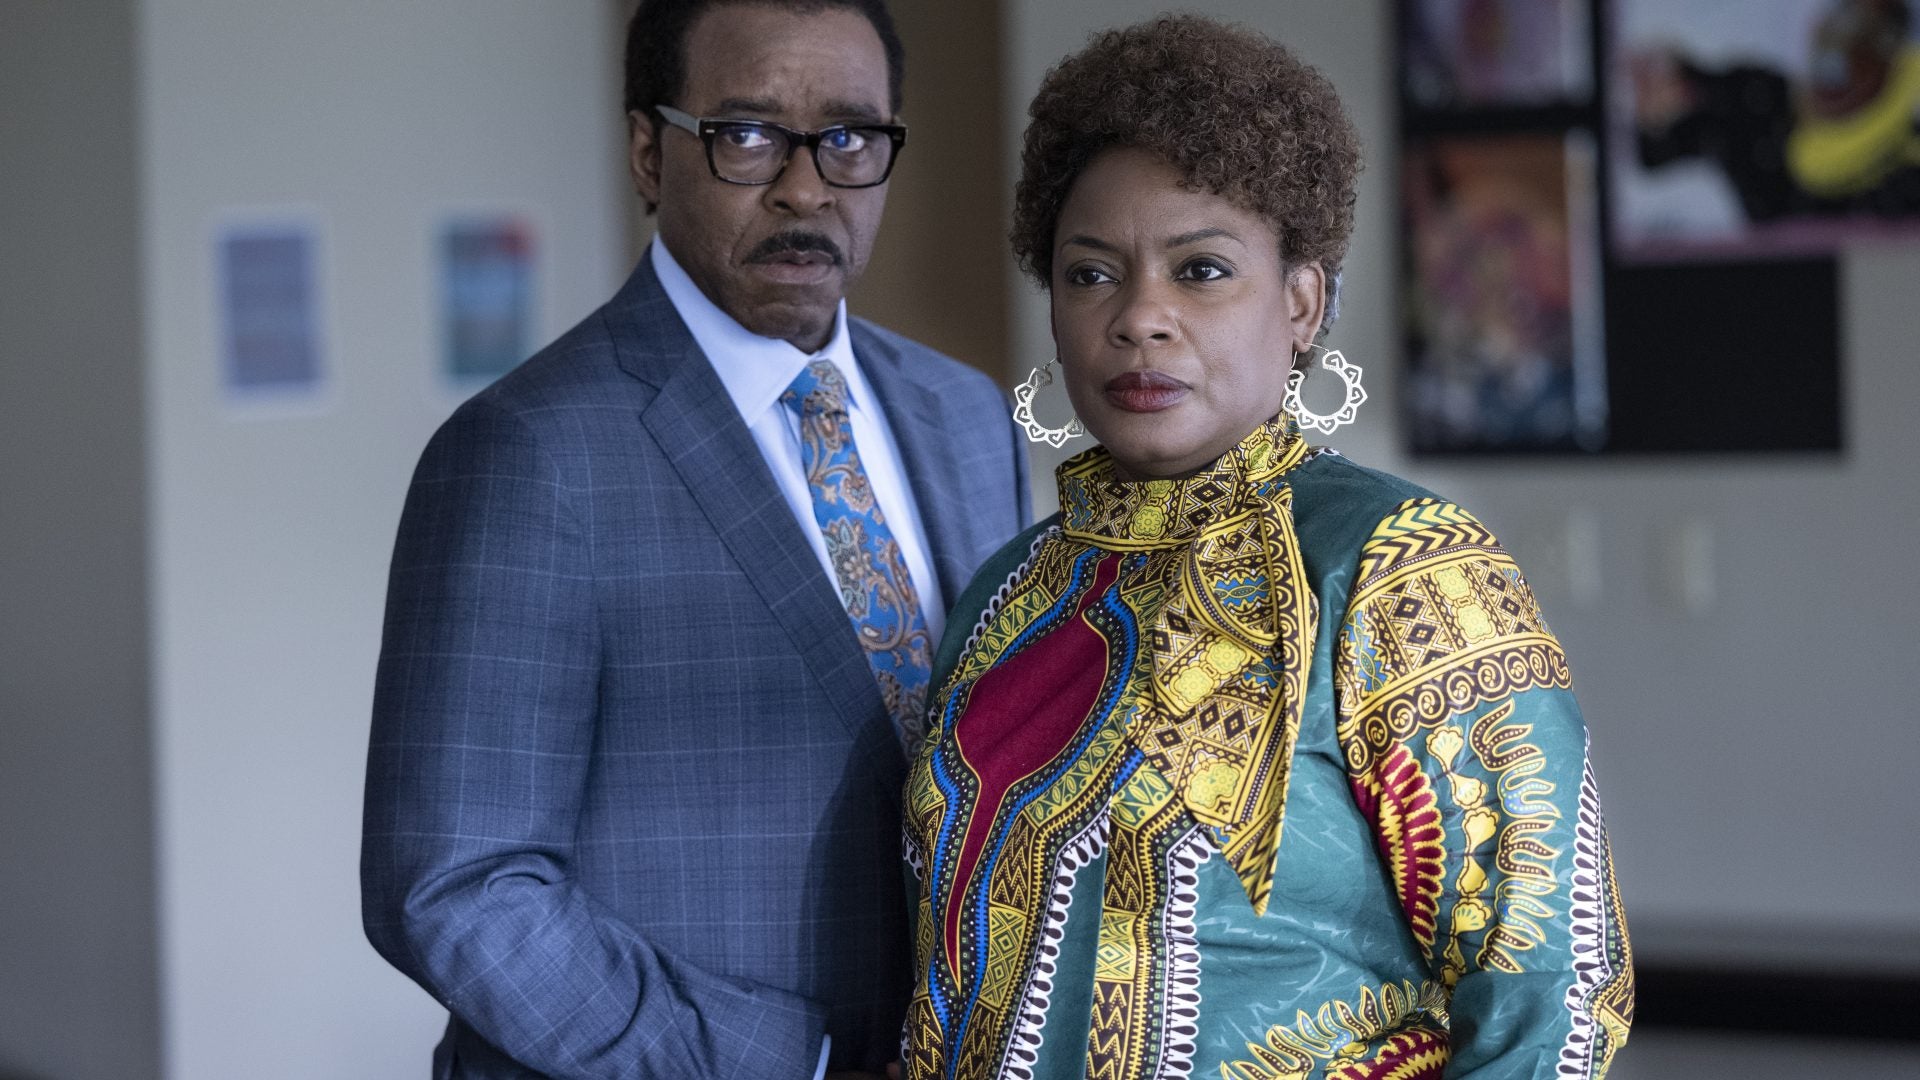 EXCLUSIVE: Watch Aunjanue Ellis and Courtney B. Vance In A First Look At '61st Street'